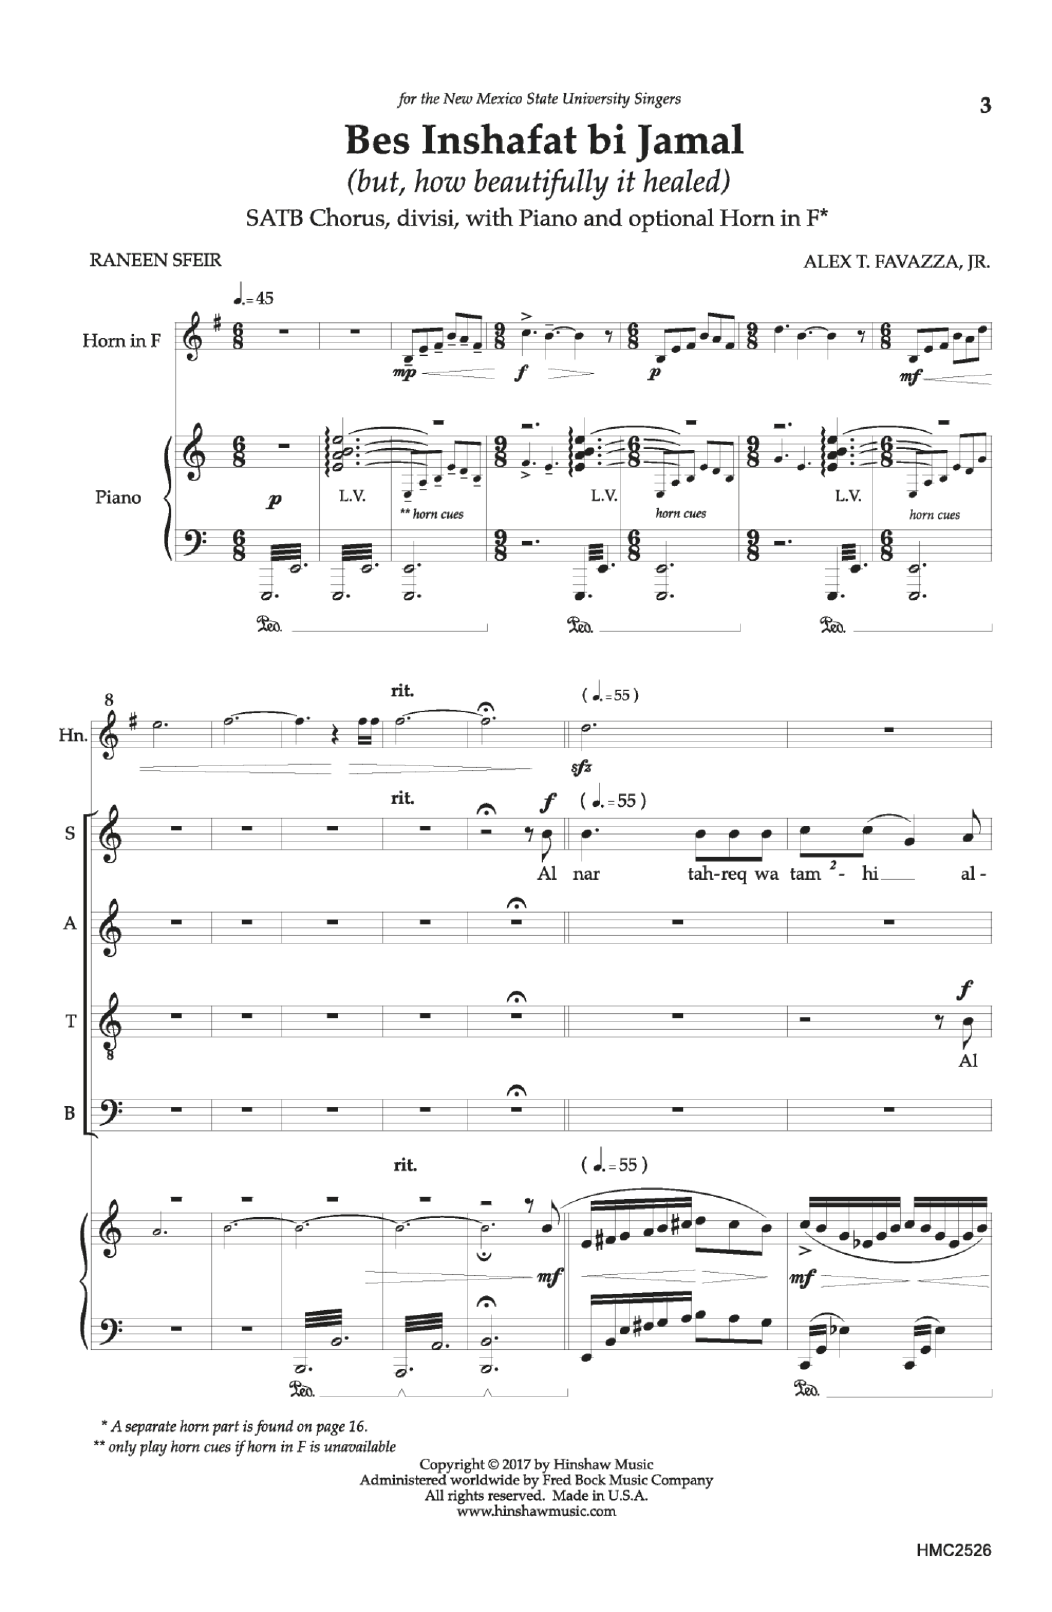 Alex T. Favazza Bes Inshafat bi Jamal (but, how beautifully it healed) sheet music notes and chords. Download Printable PDF.